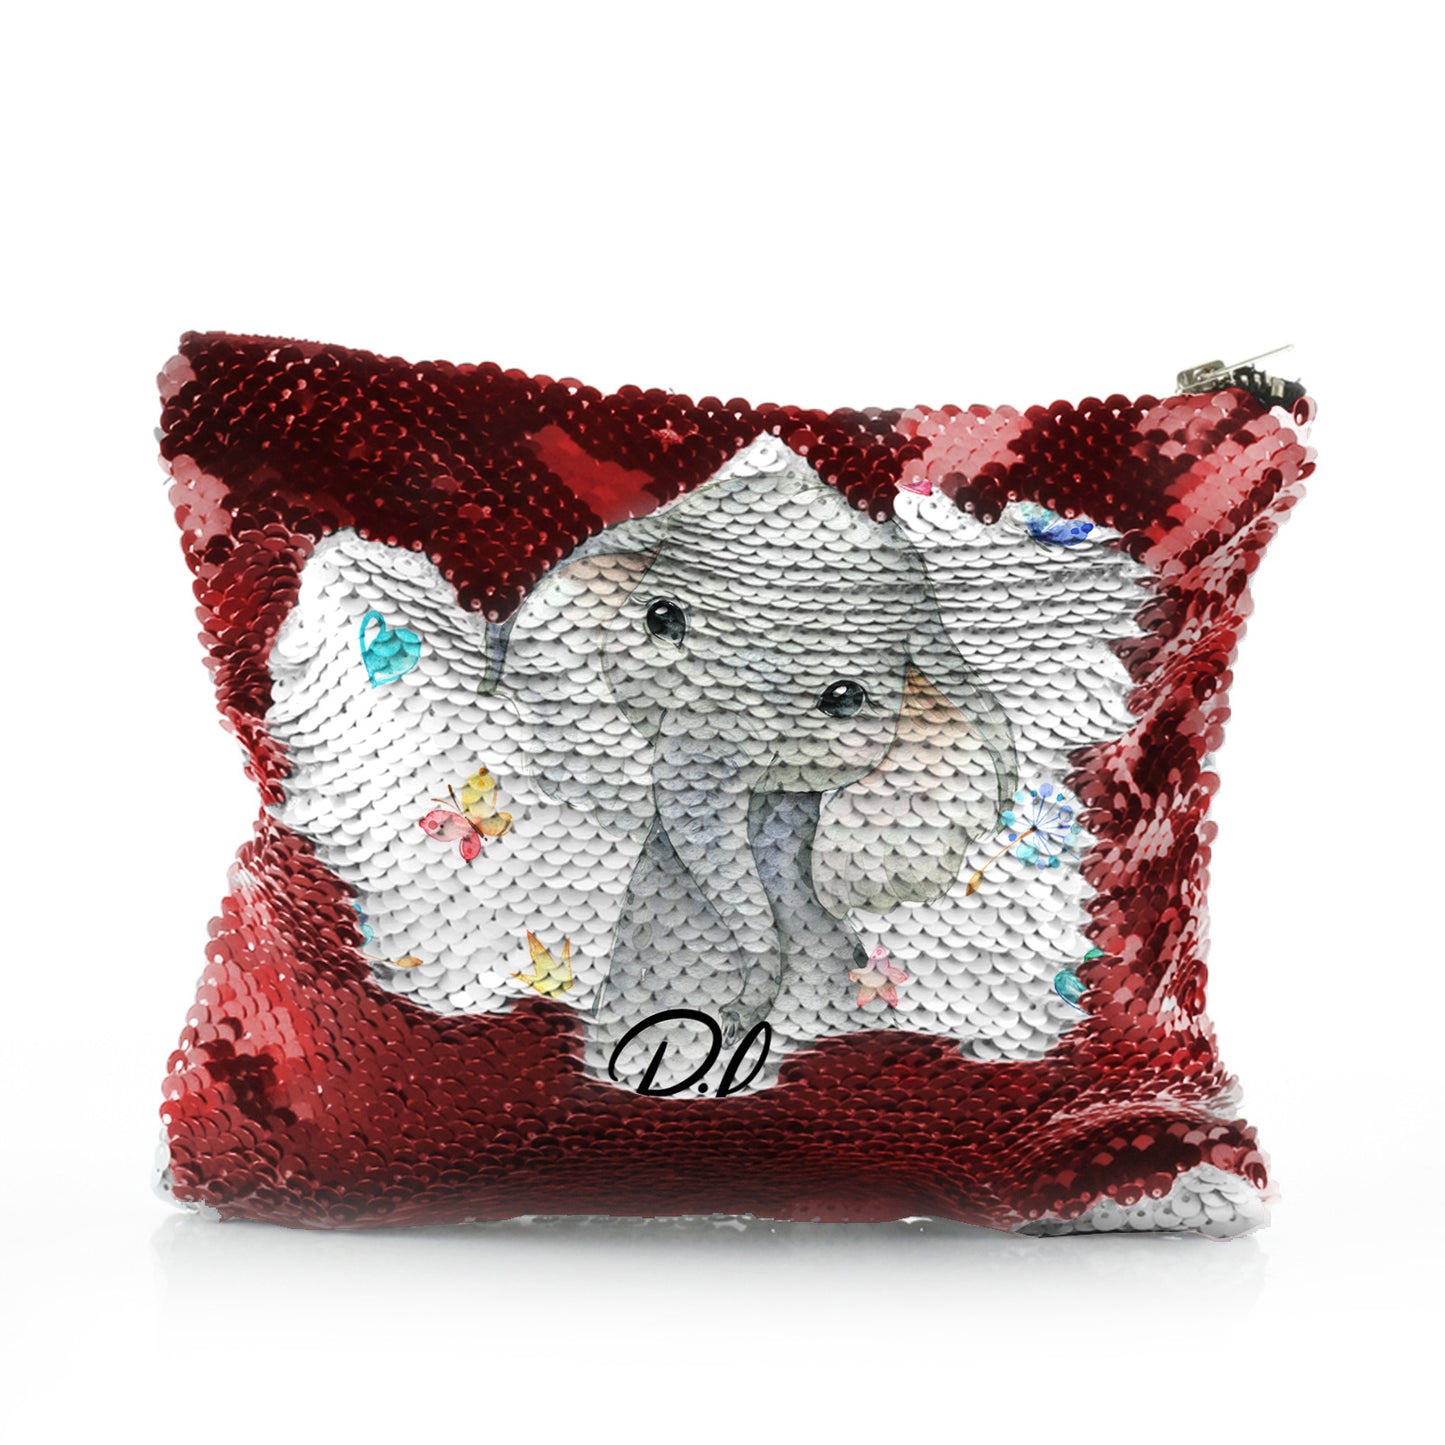 Personalised Sequin Zip Bag with Grey Elephant with Hearts Stars Crowns Butterfly and Cute Text